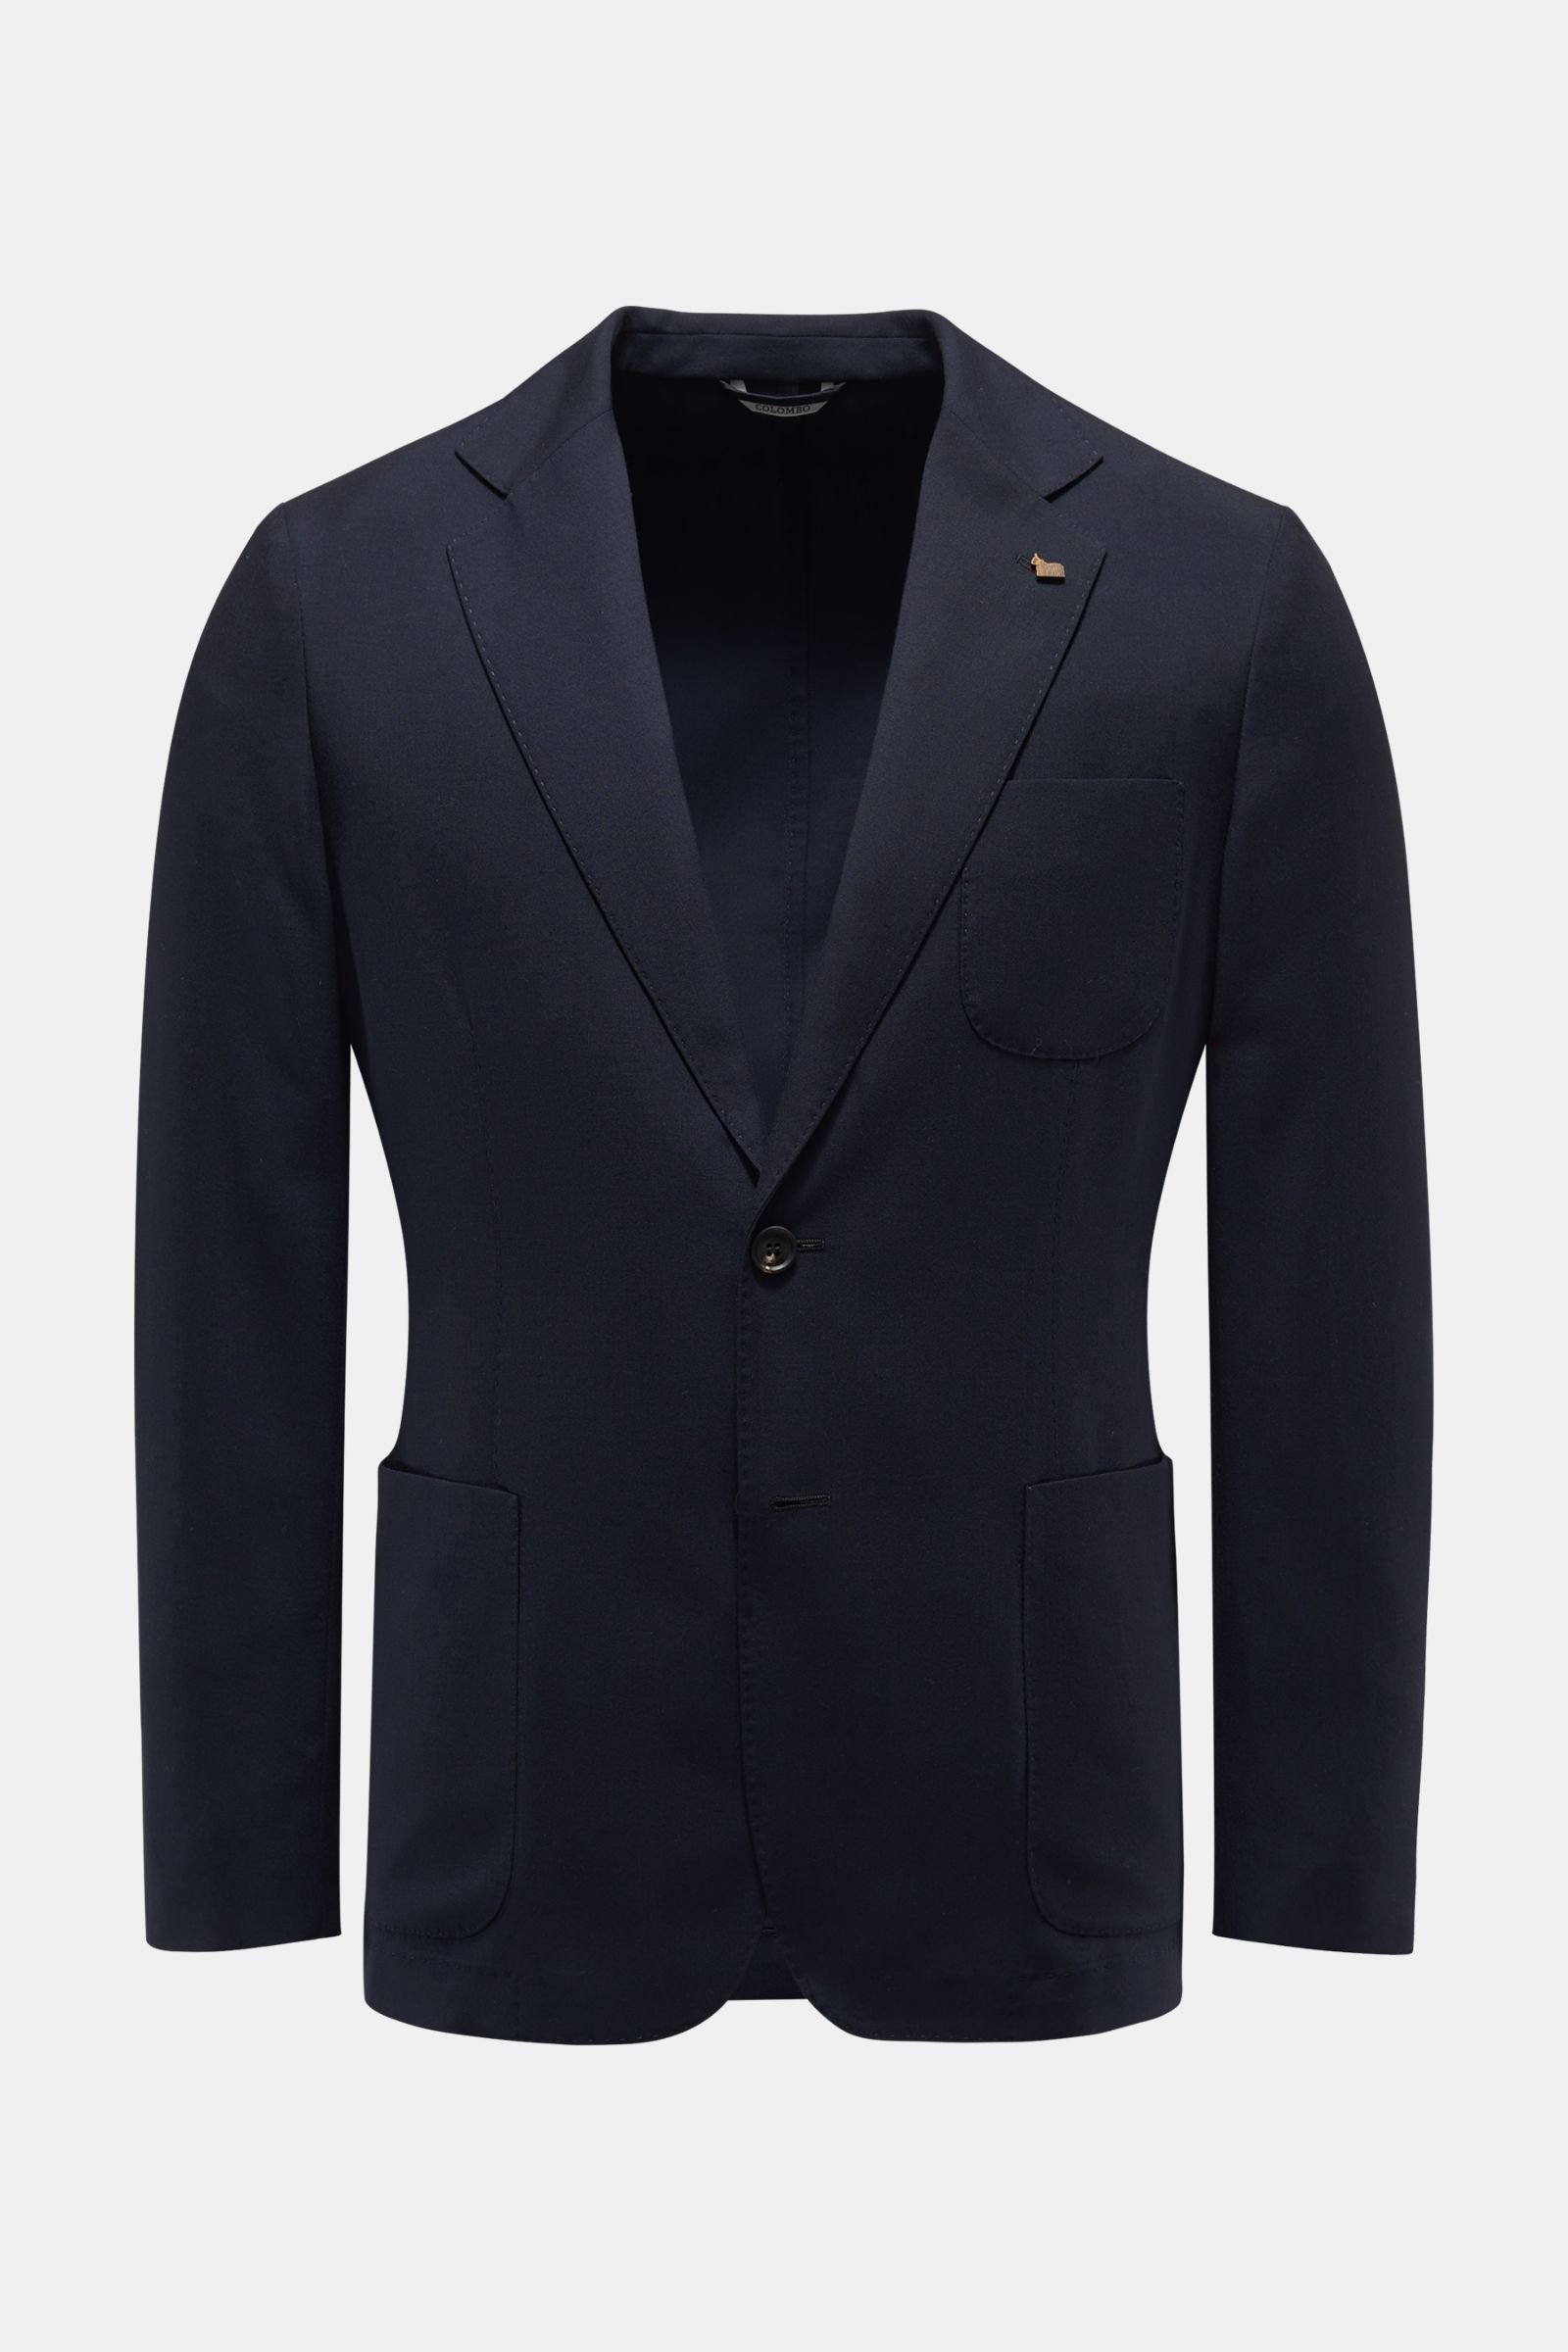 Cashmere smart-casual jacket navy